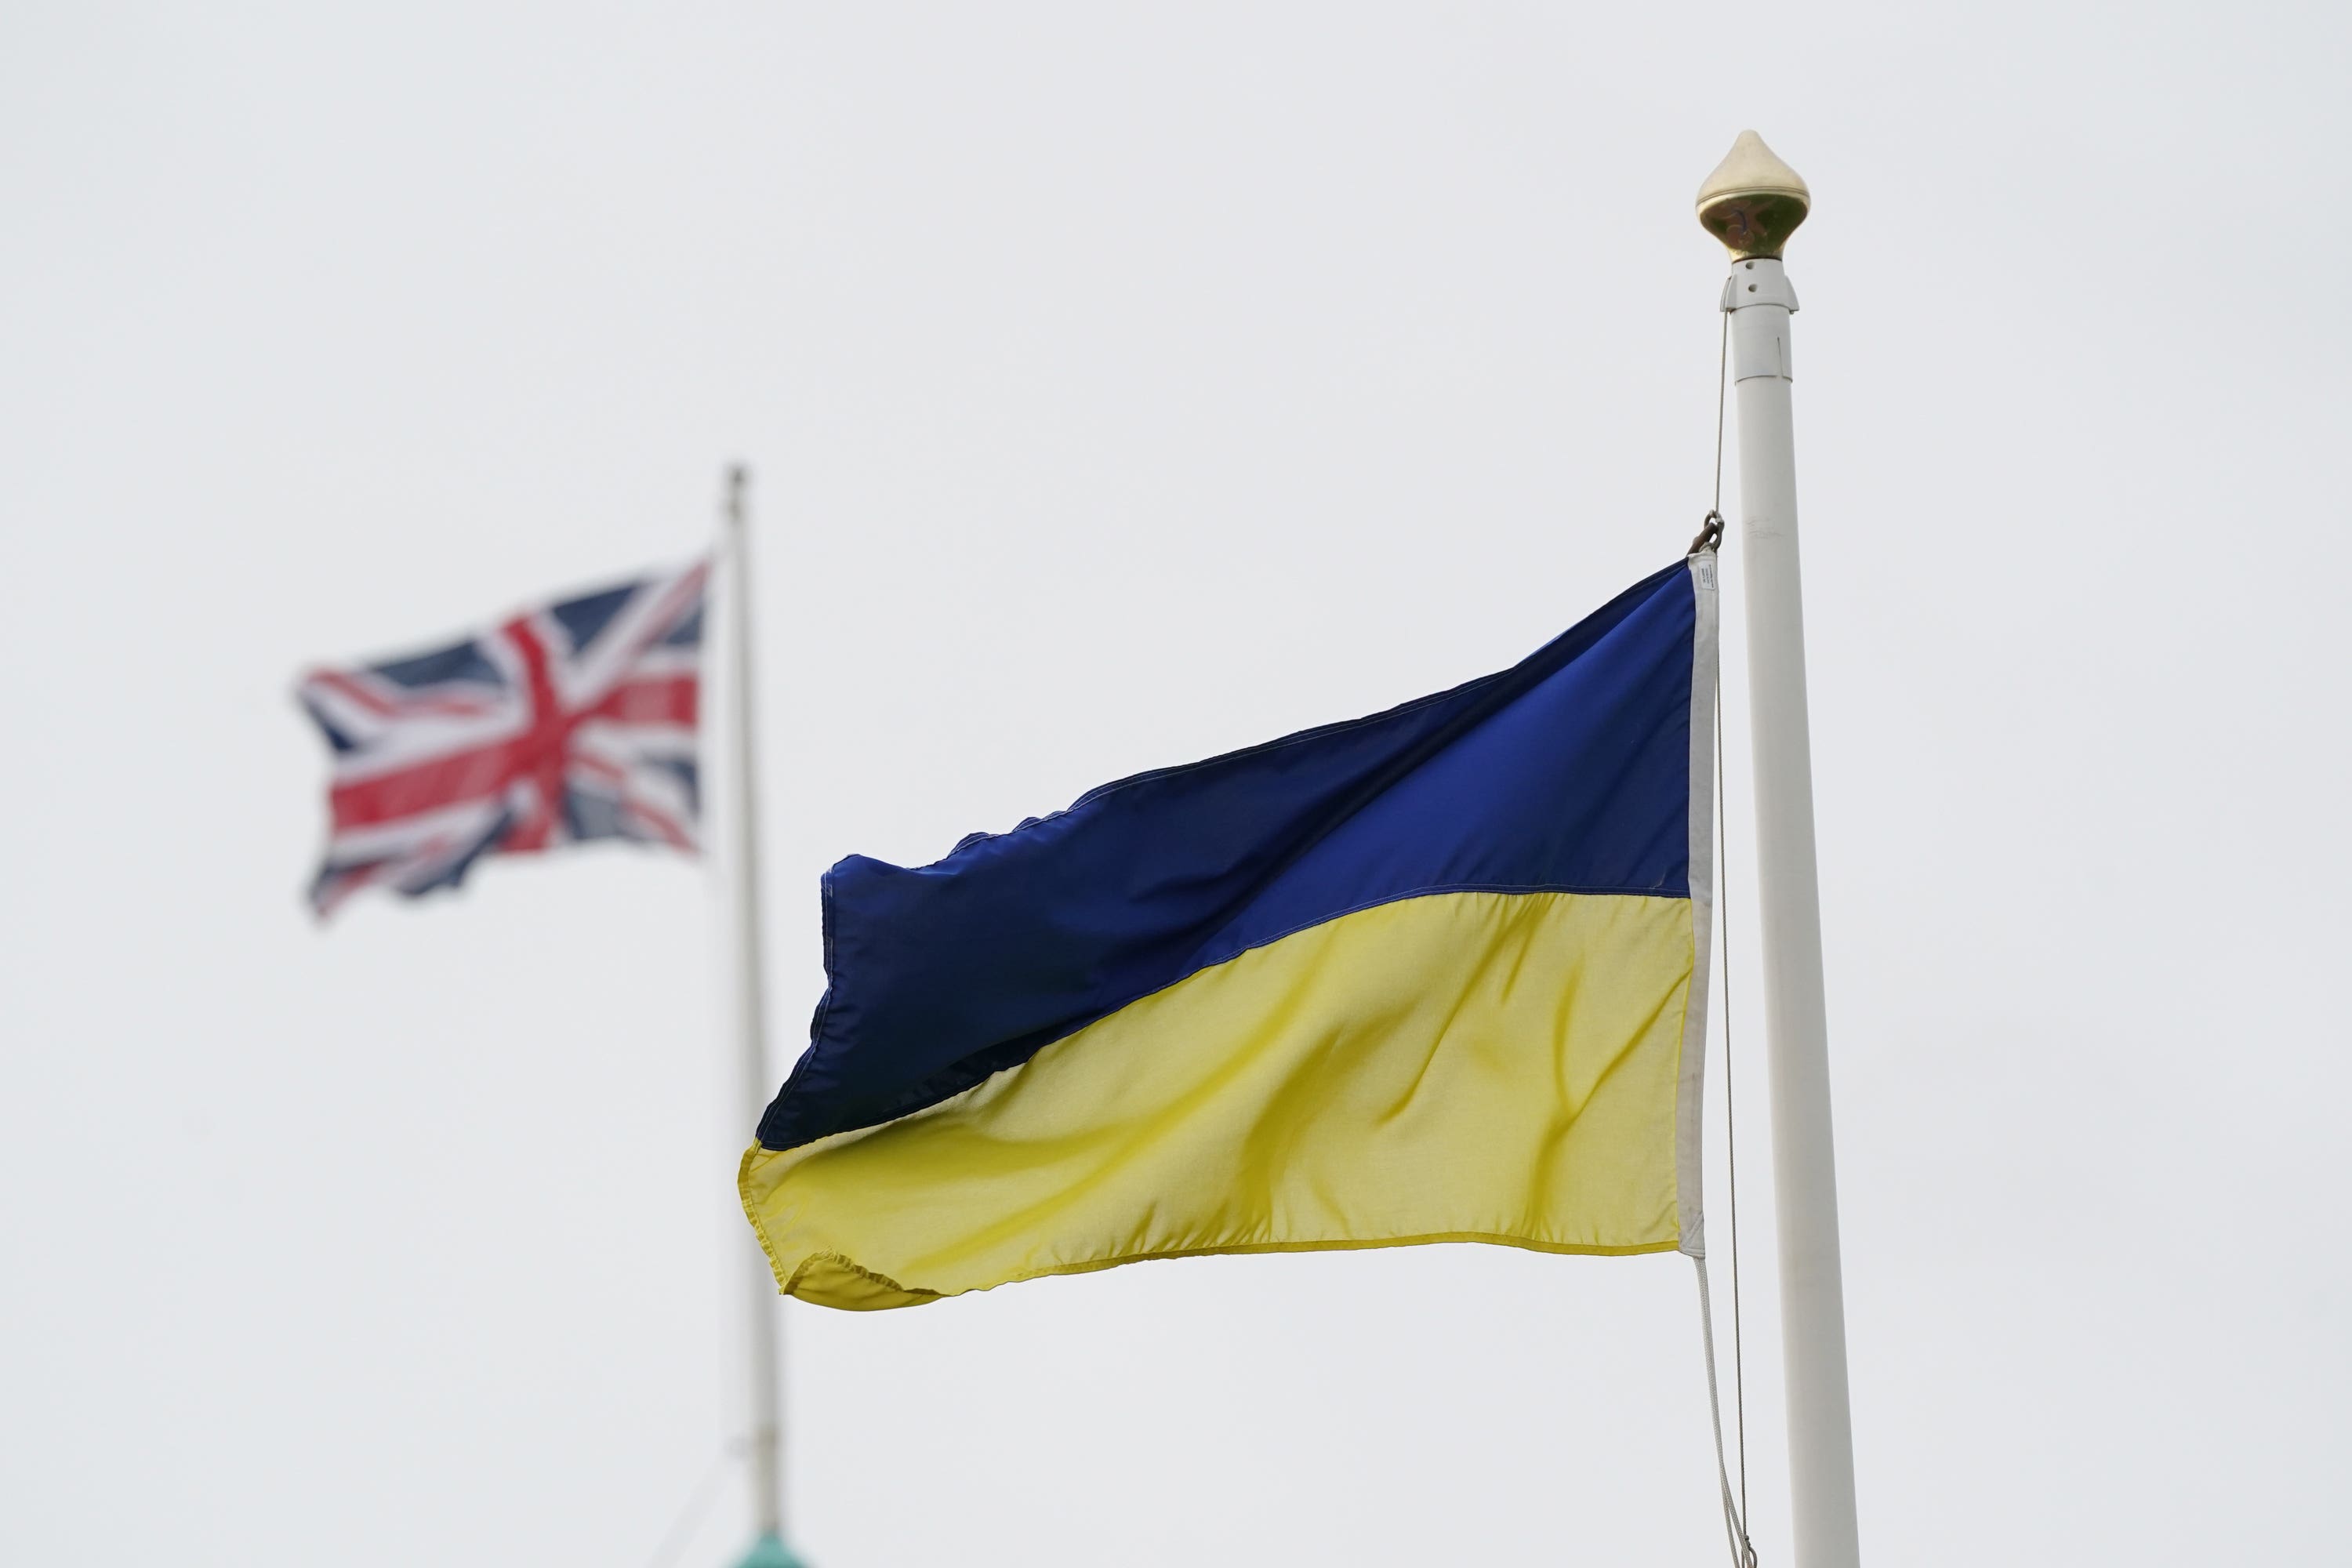 Tens of thousands of Ukrainians have arrived in the UK feeling war since Russia’s invasion in early 2022 (Owen Humphreys/PA)